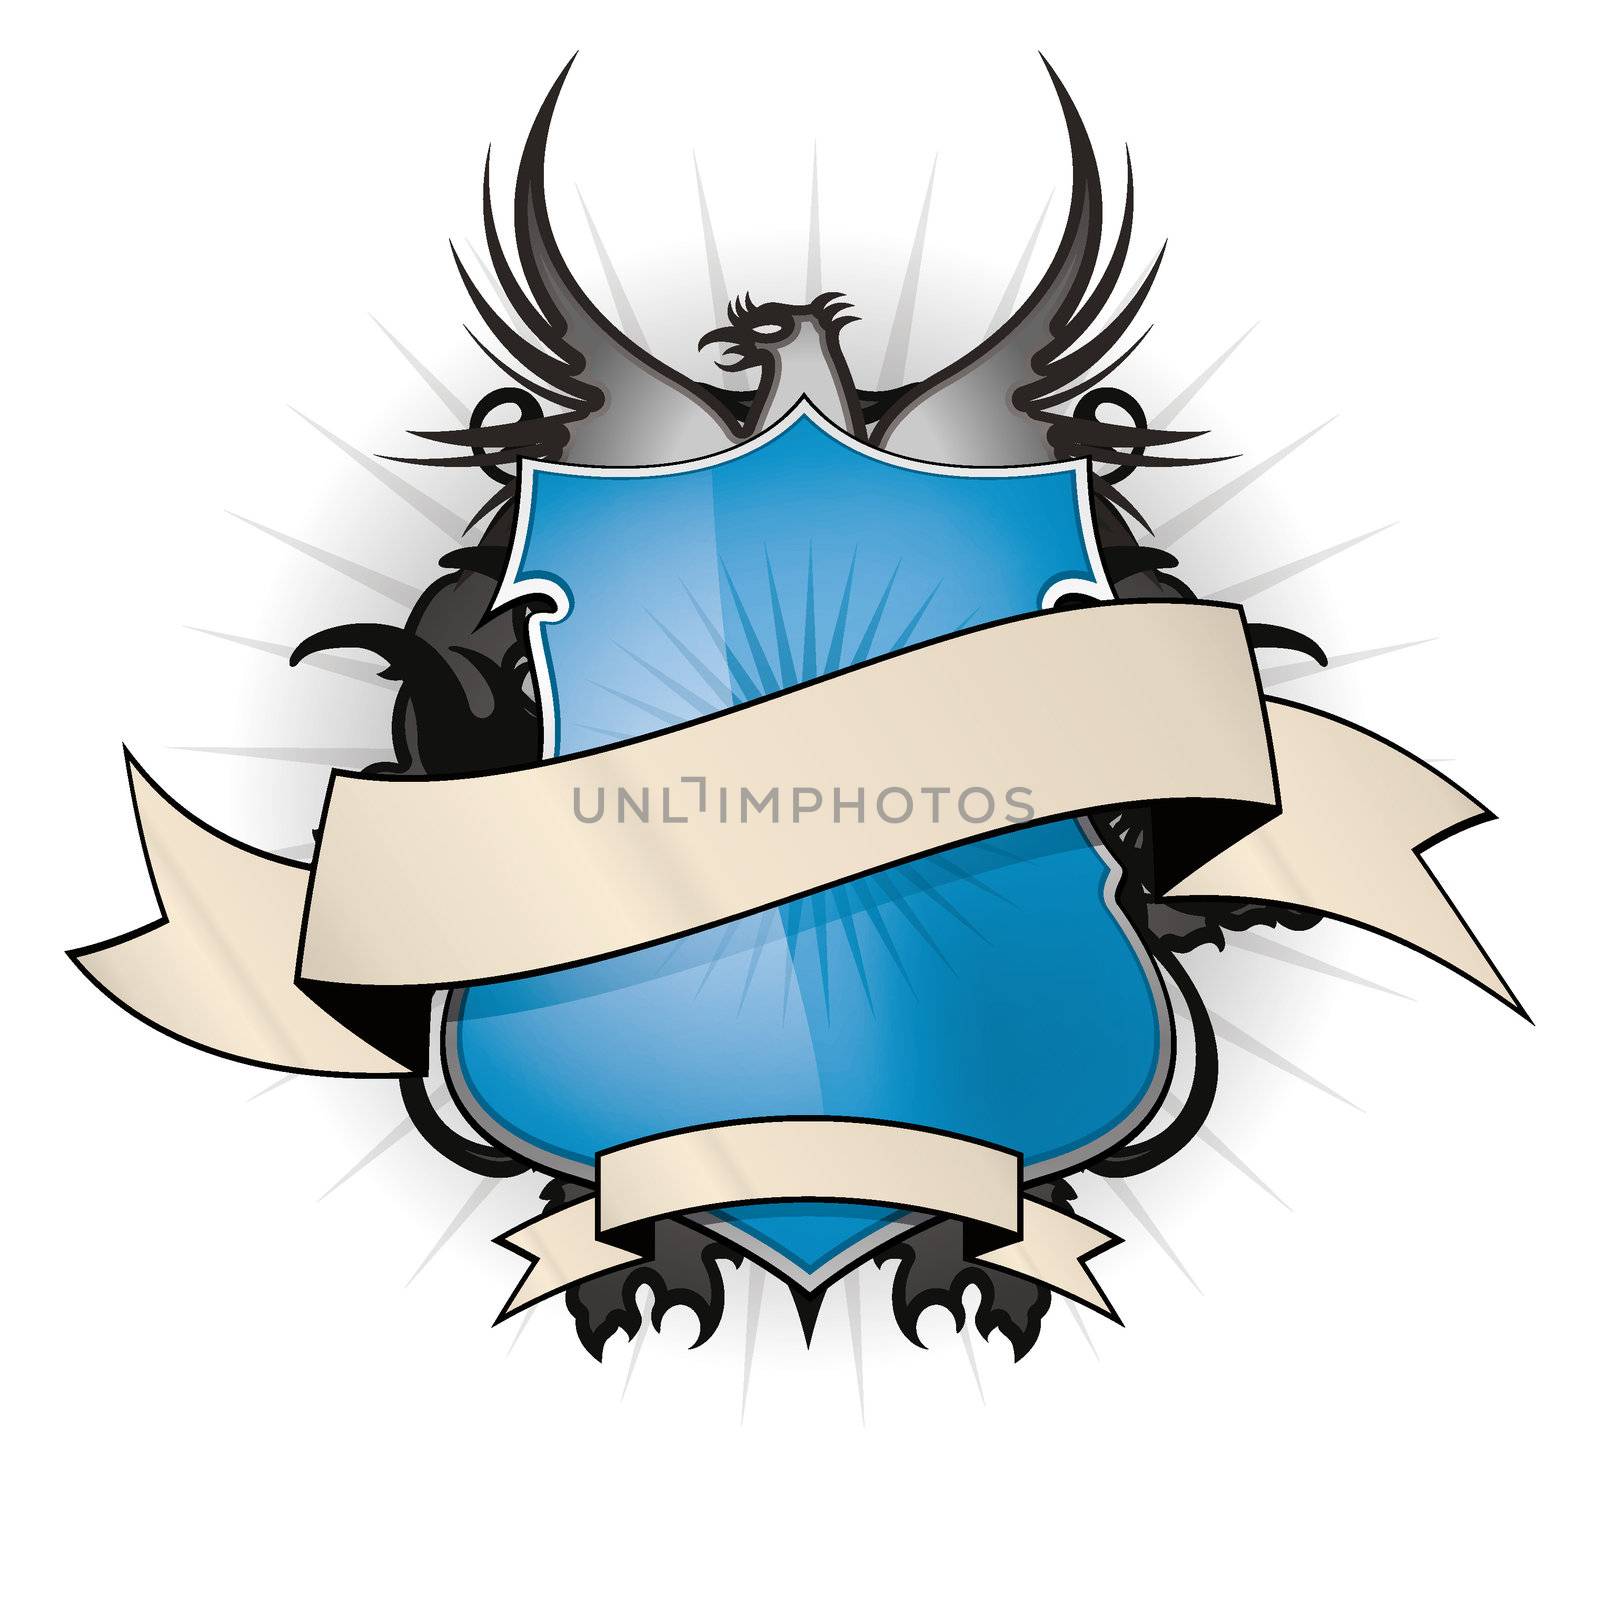 An image of a blue shield background